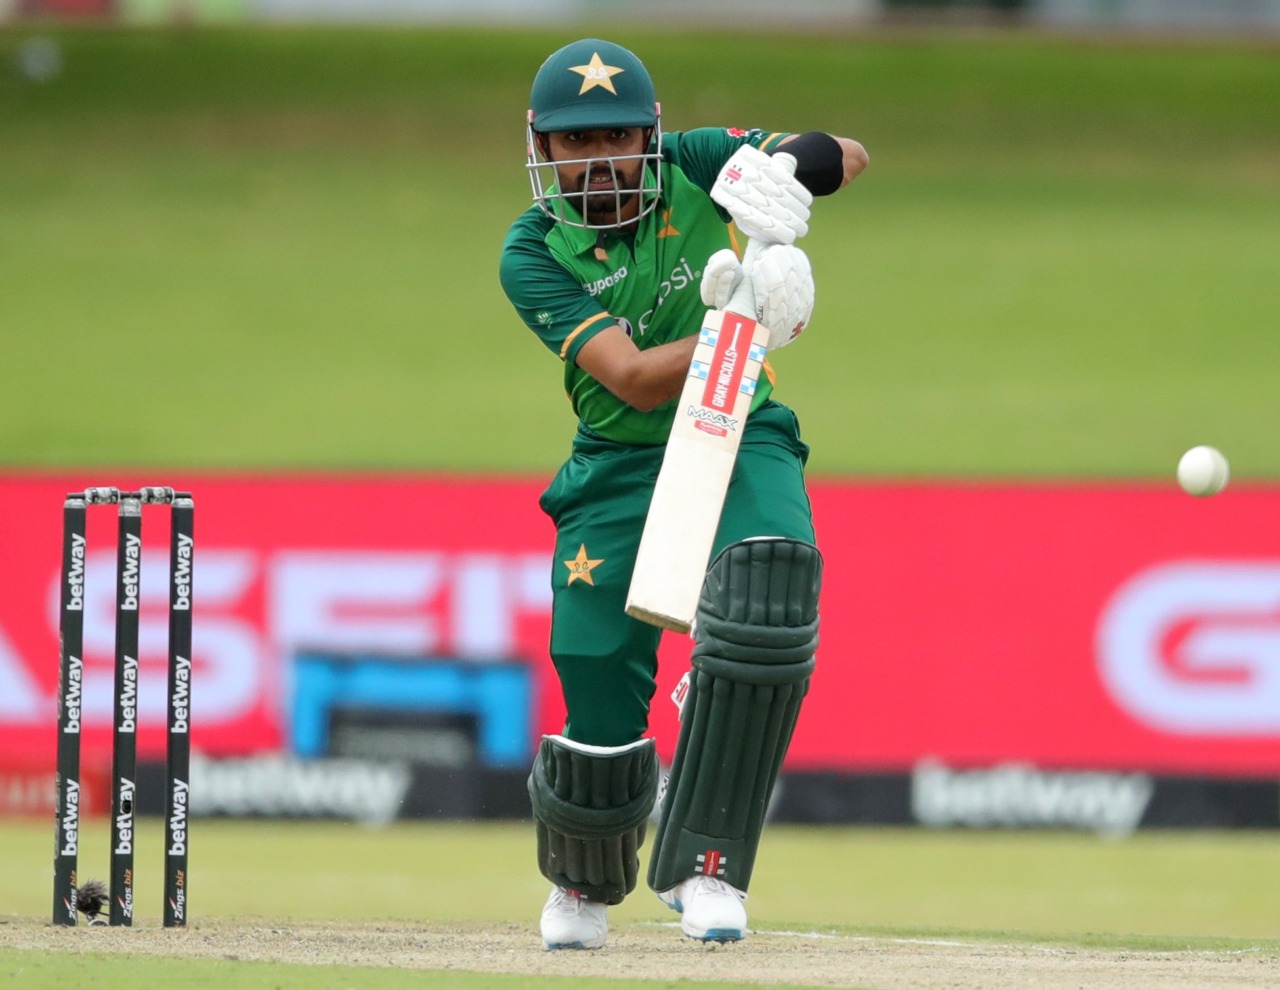 Read more about the article Pak scores 320/7 against S. Africa in 3rd ODI